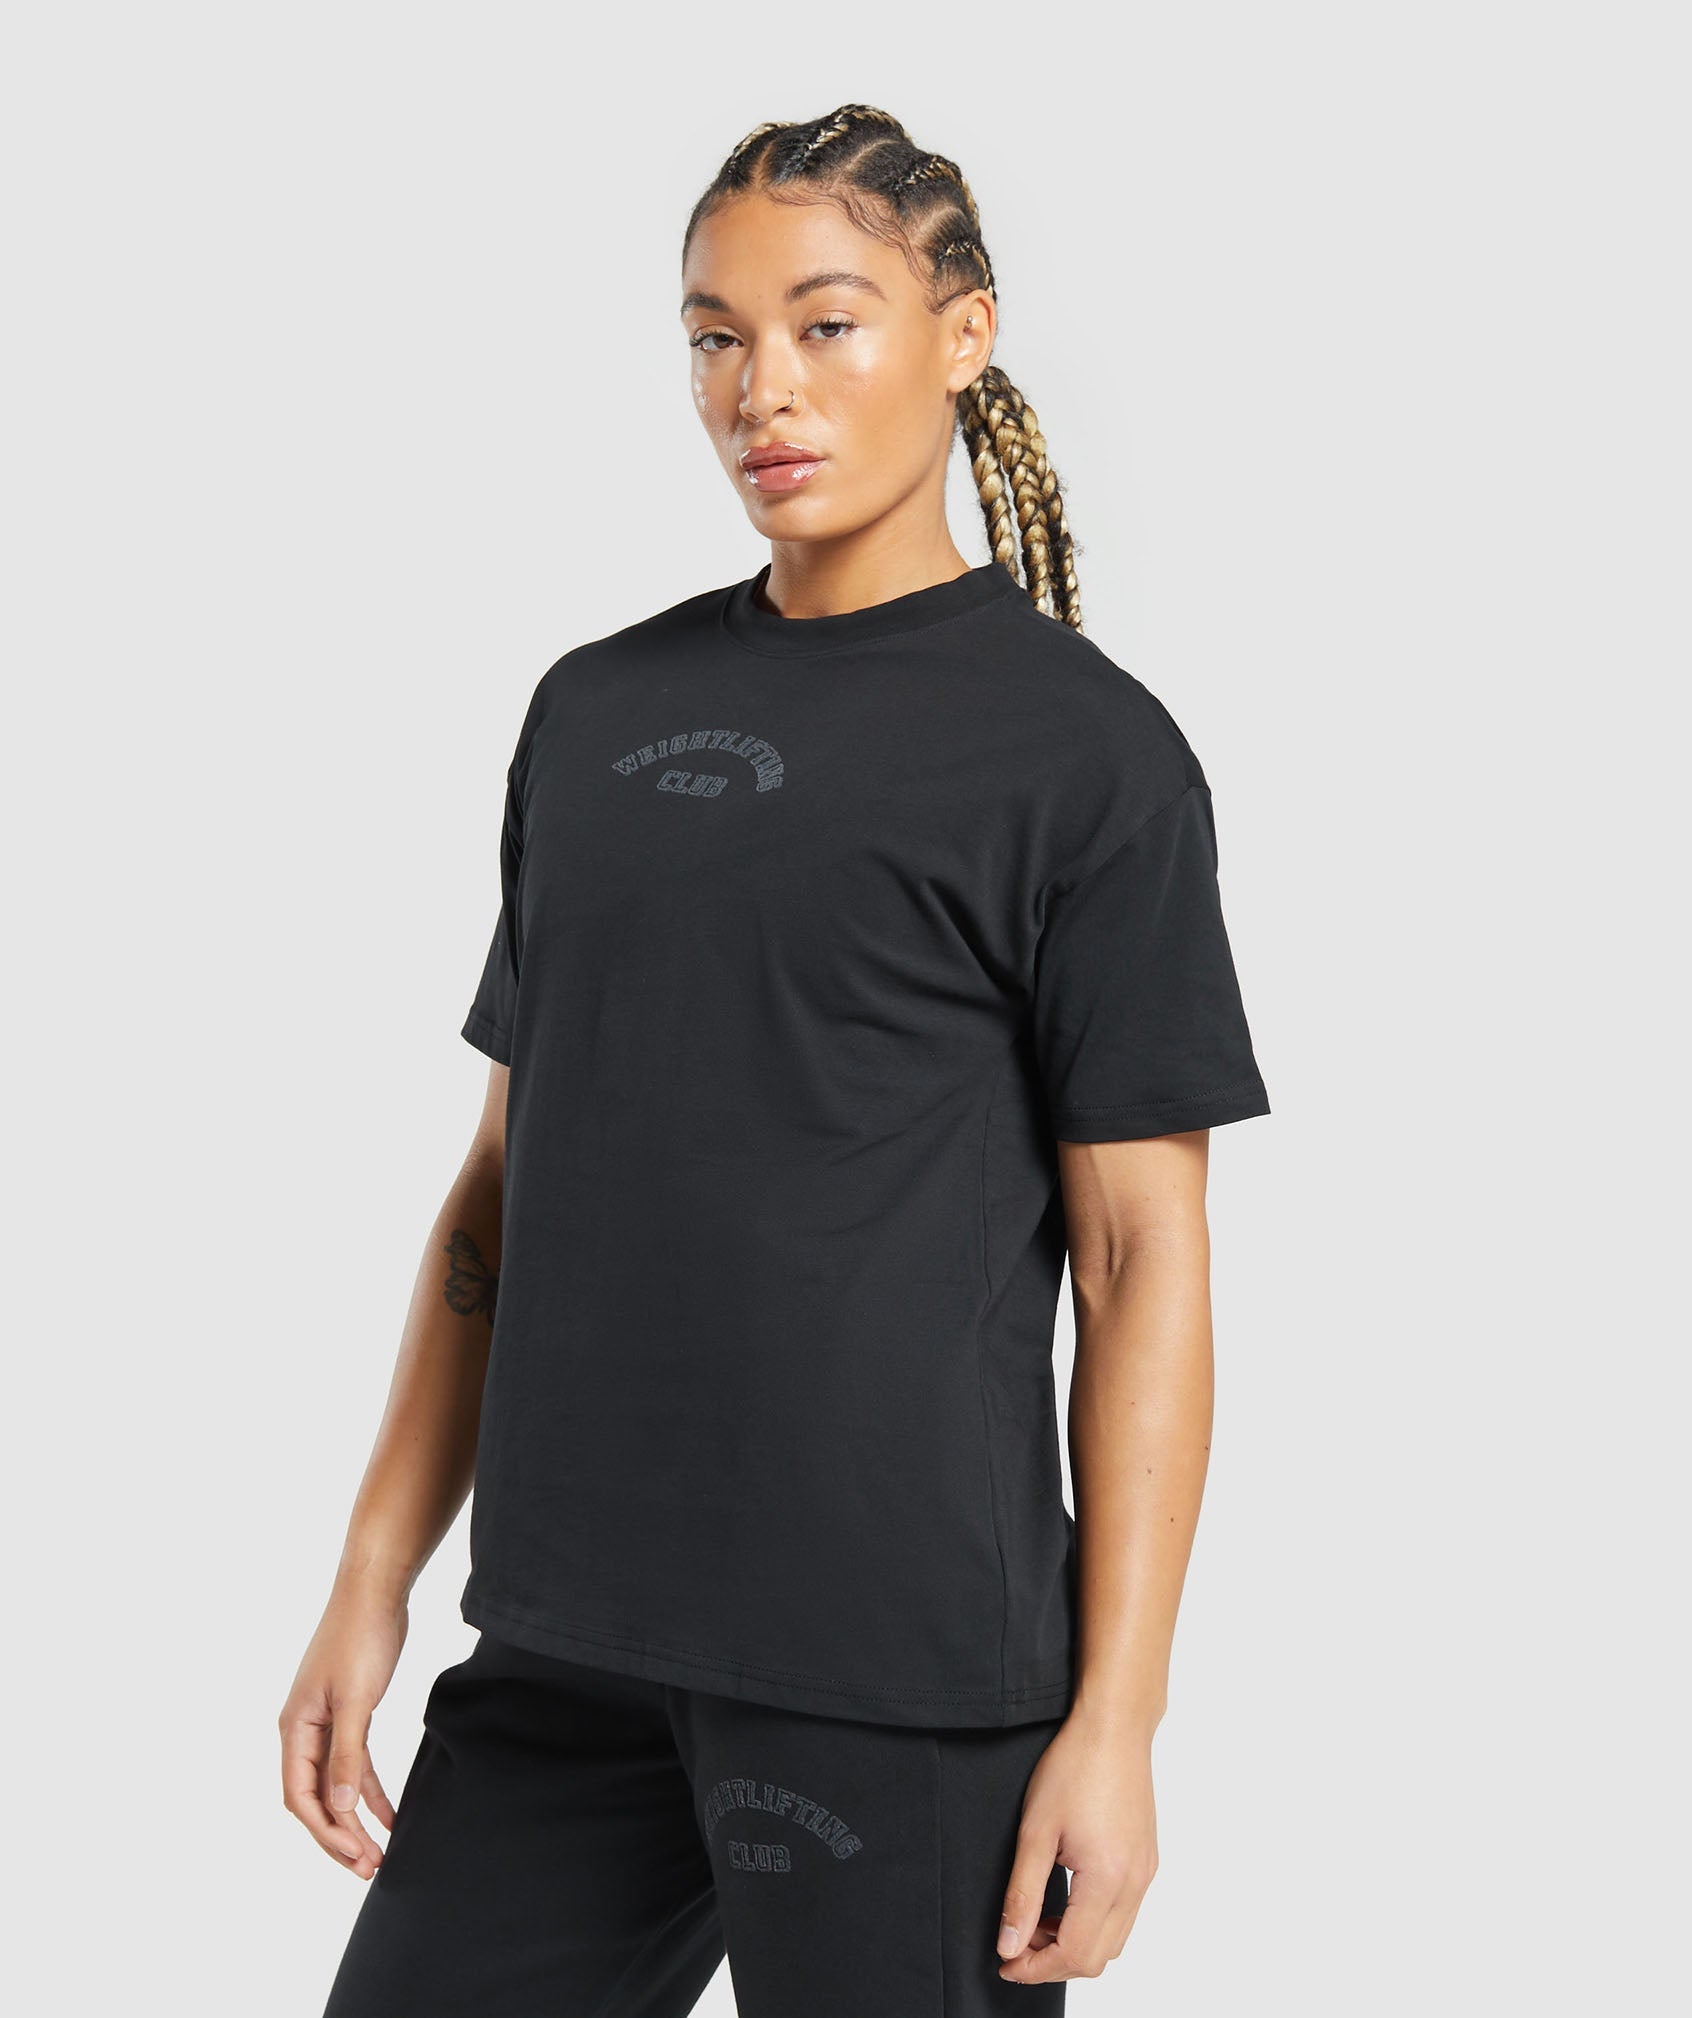 Weightlifting Oversized T-Shirt in Black - view 3